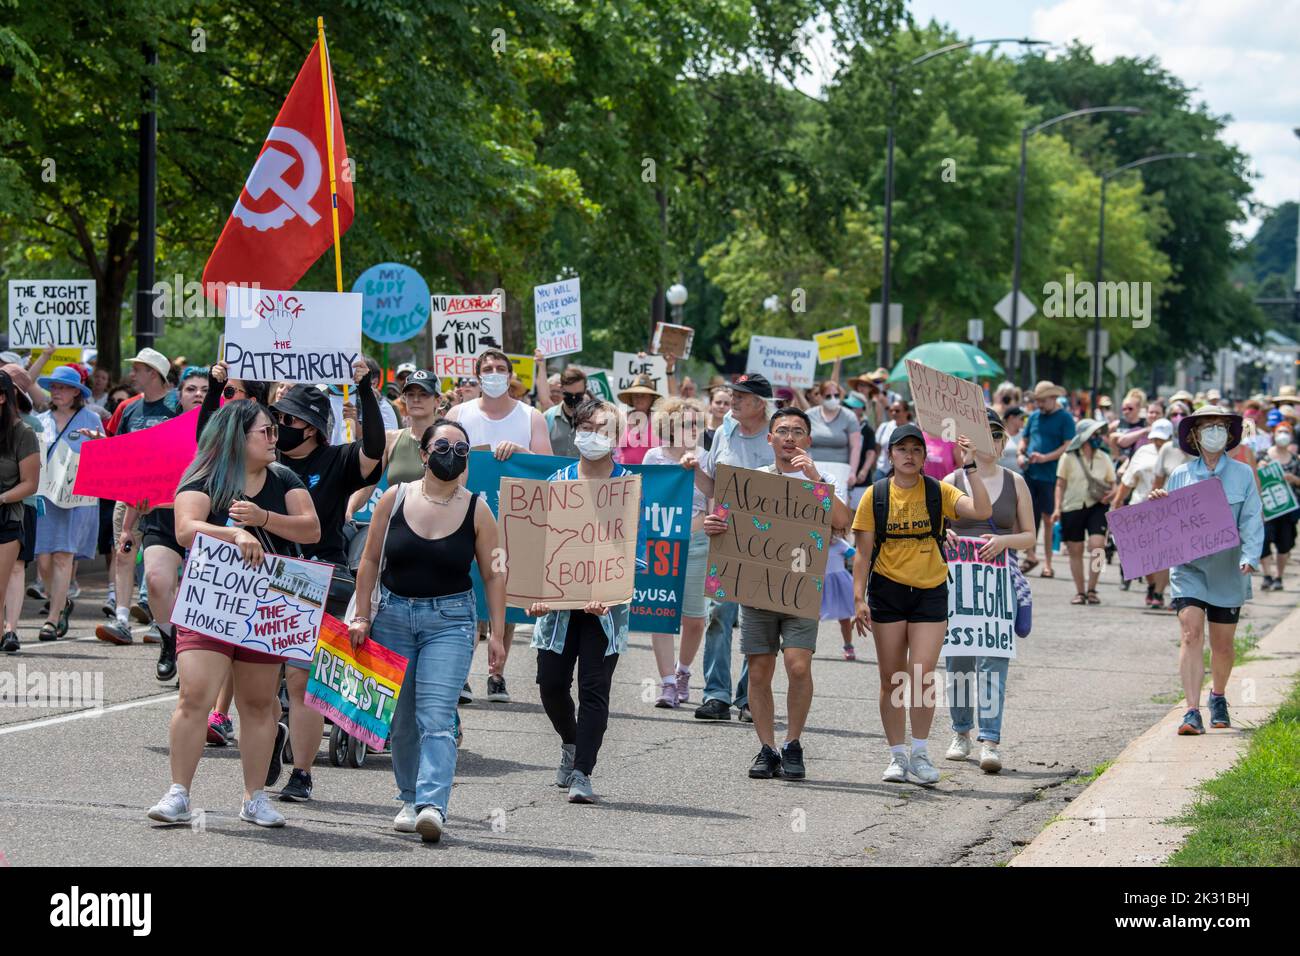 St. Paul, Minnesota. July 17, 2022.  Thousands march and rally in support of legal abortion access after the U.S. Supreme court overturned the federal Stock Photo